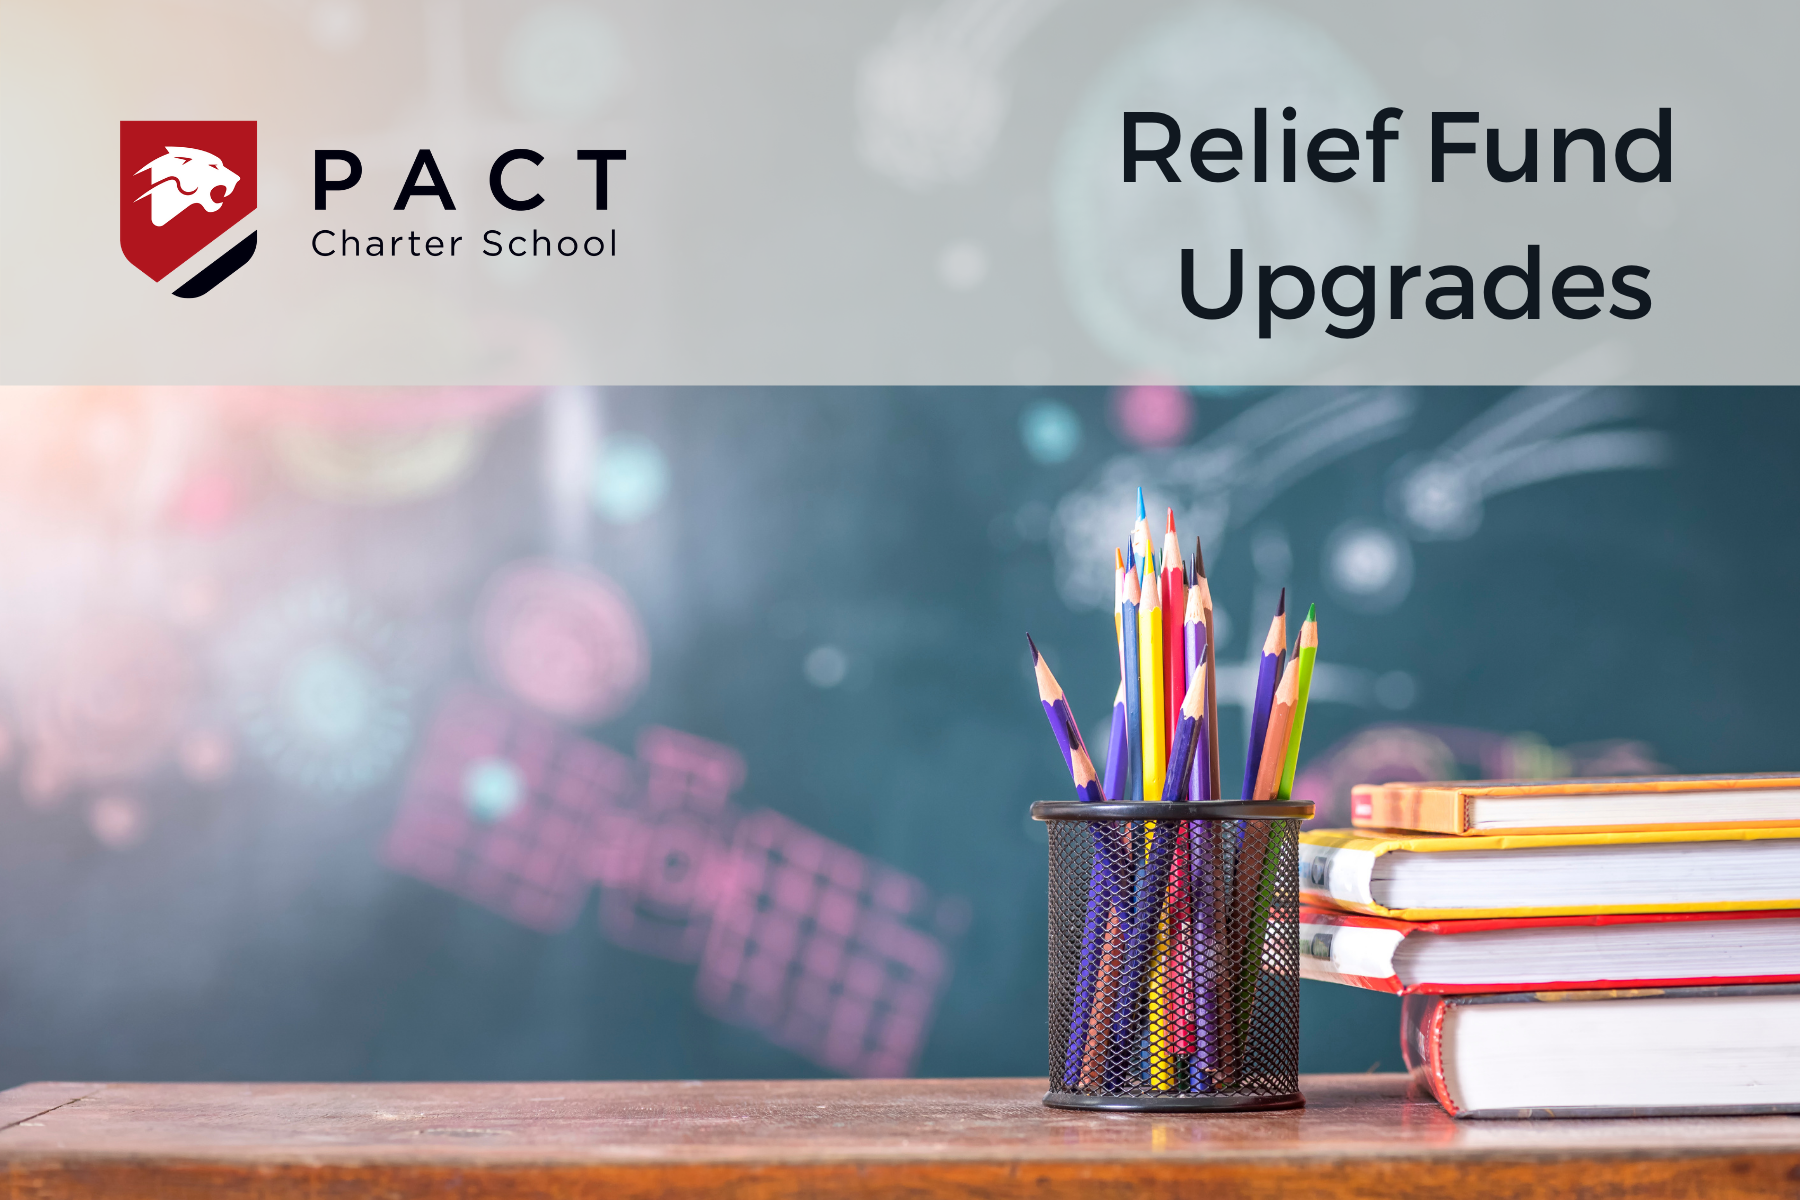 Relief Fund Upgrades at PACT